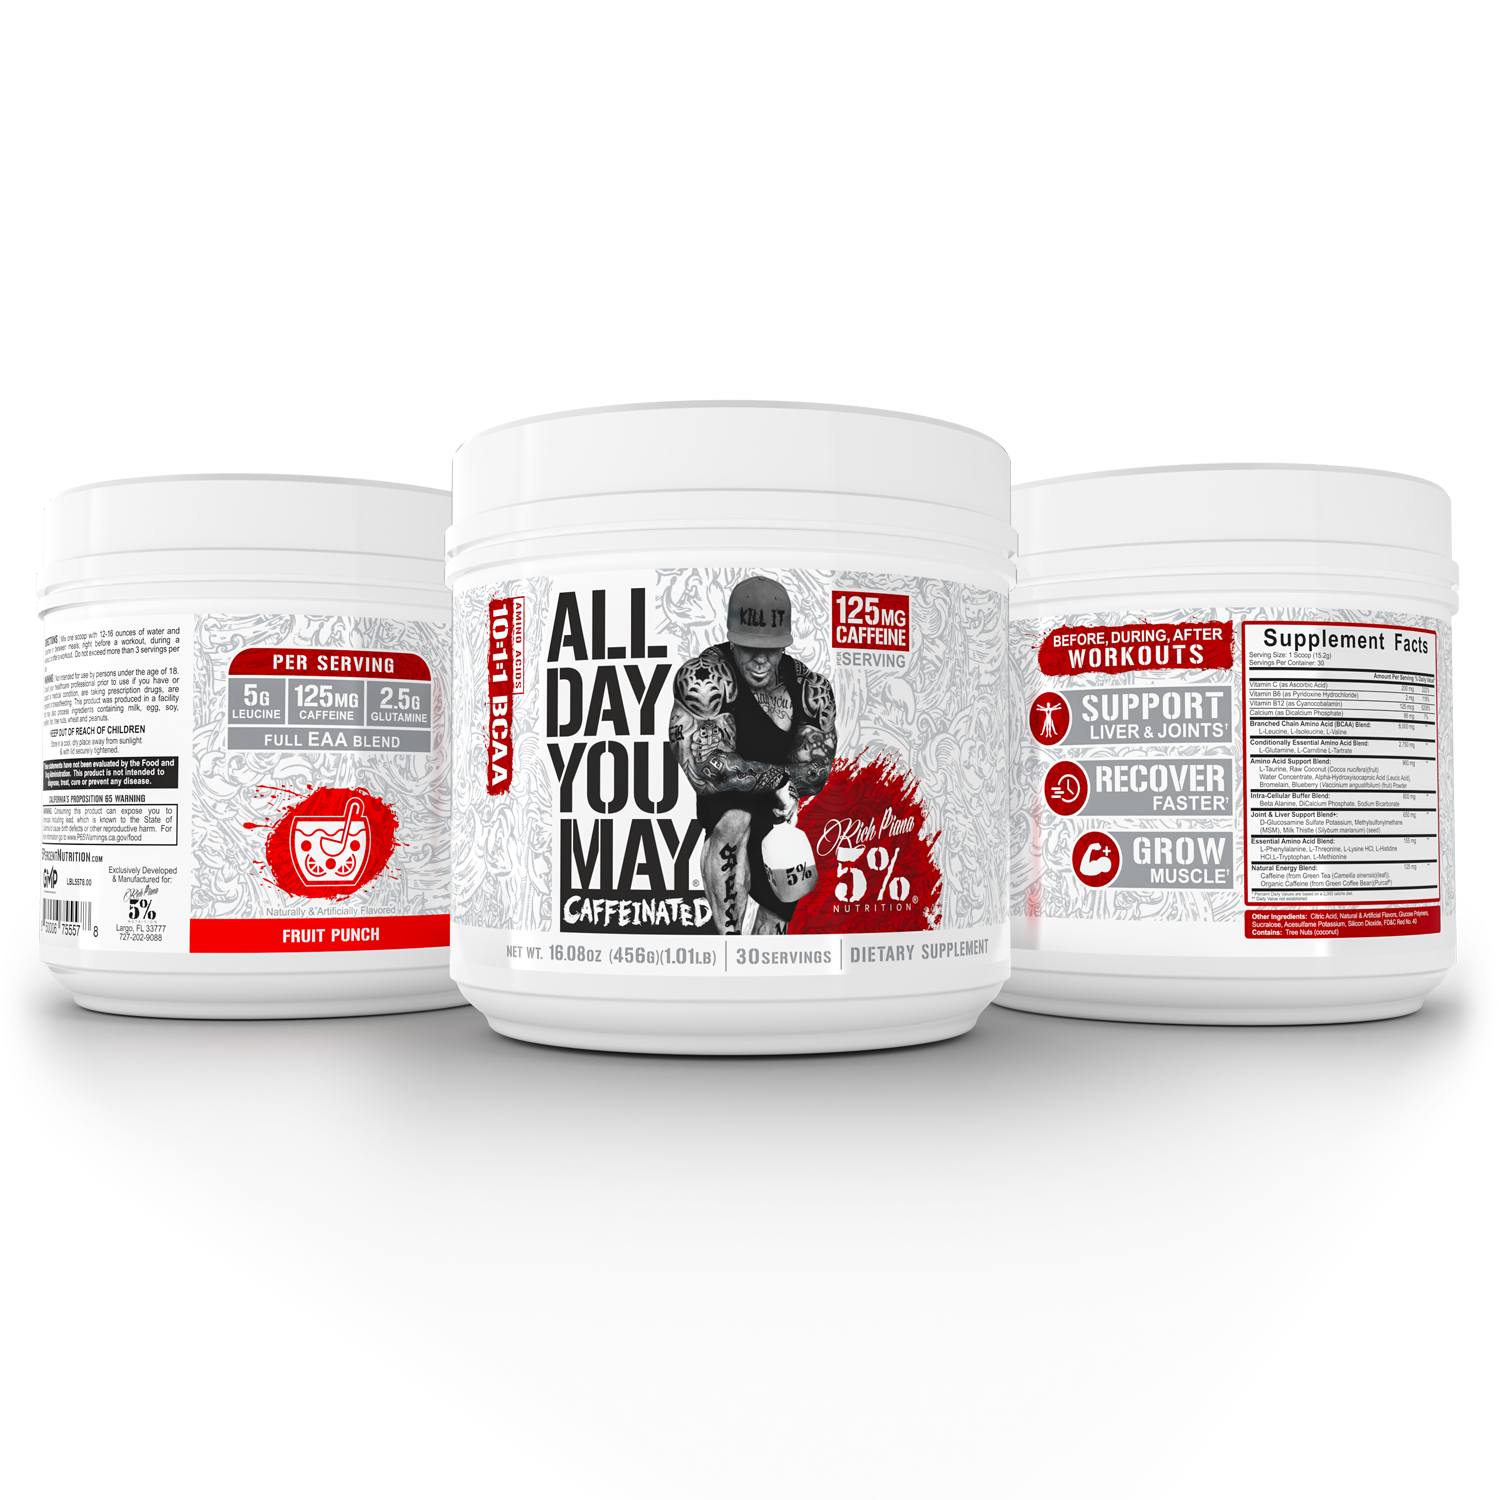 All Day You May Caffeinated BCAA Recovery Drink: Legendary Series - 5% Nutrition